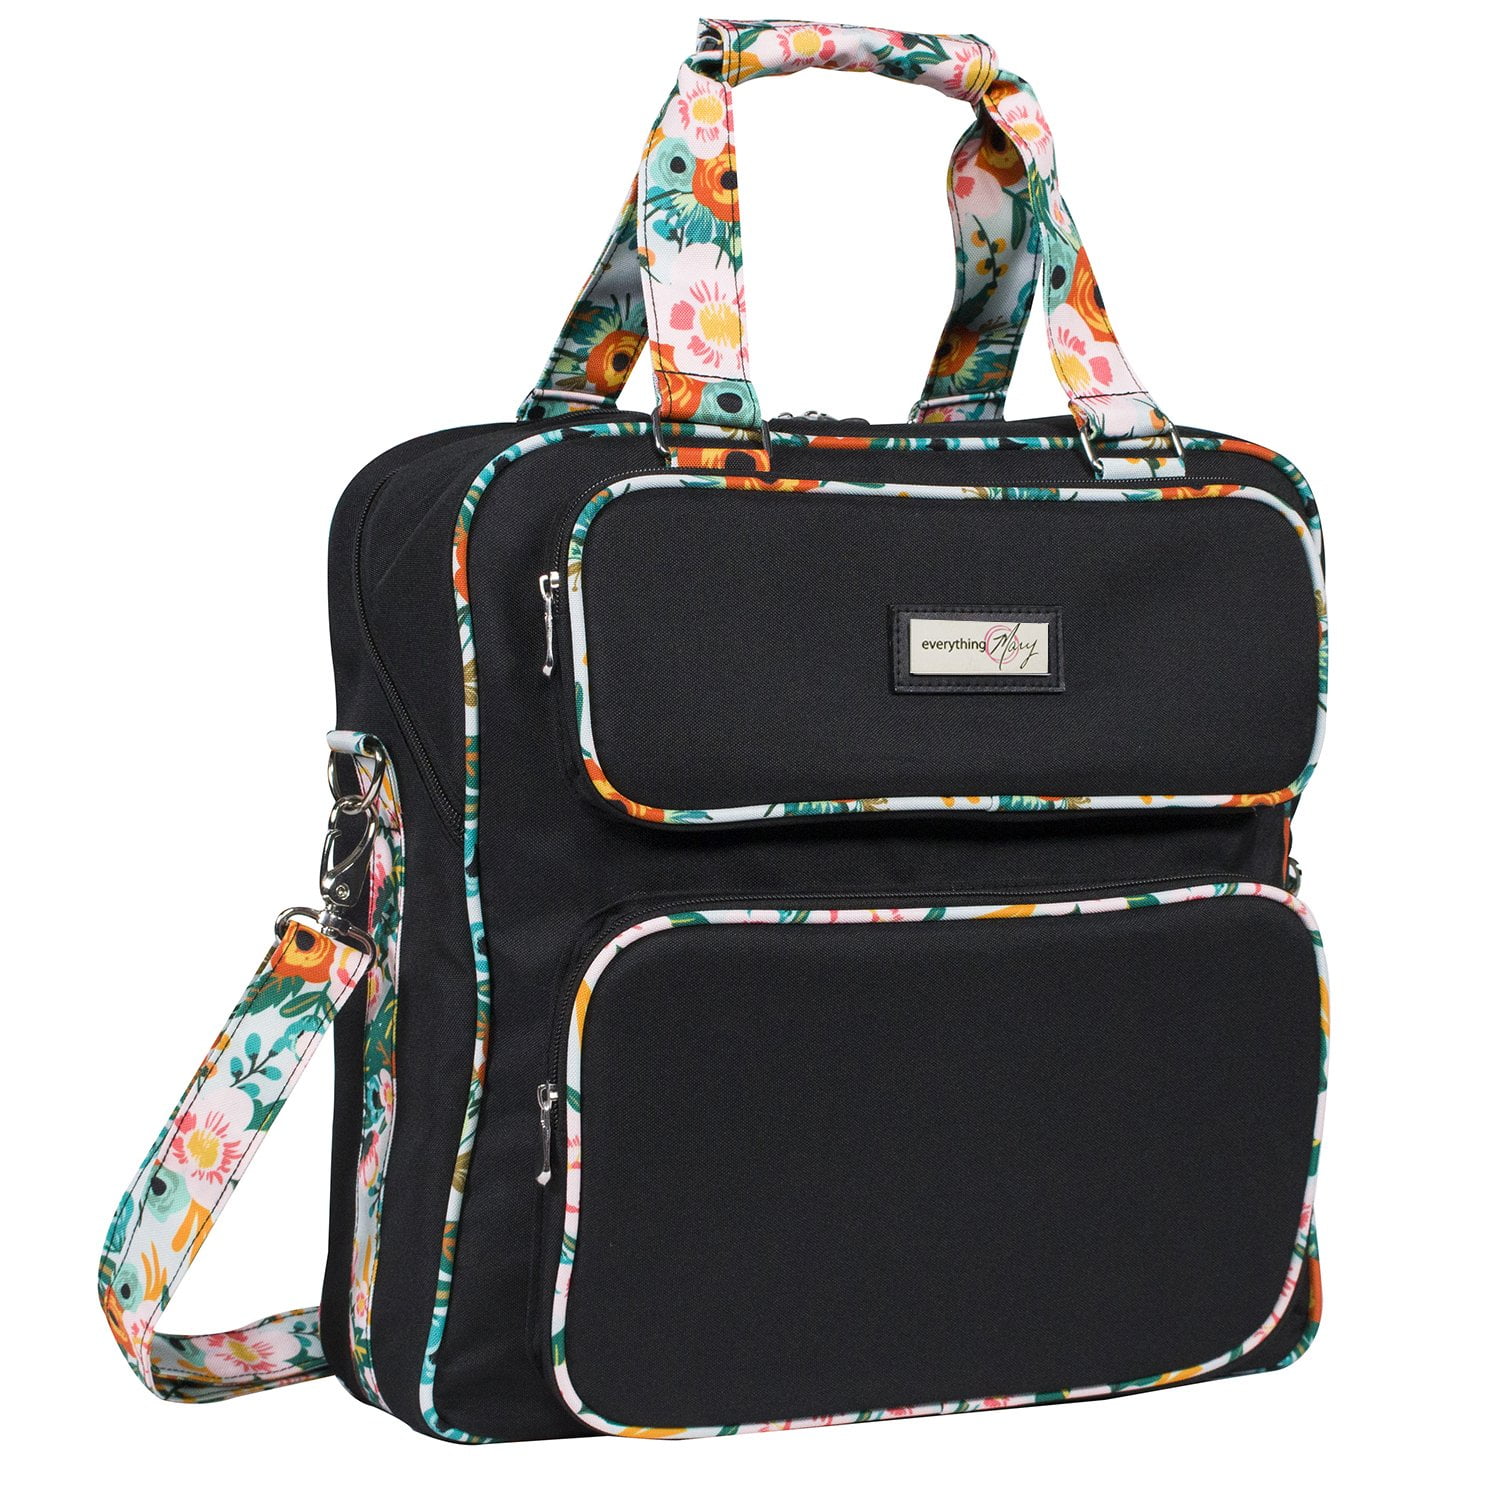 Everything Mary Scrapbook Carrying Storage Tote - Black & Floral ...